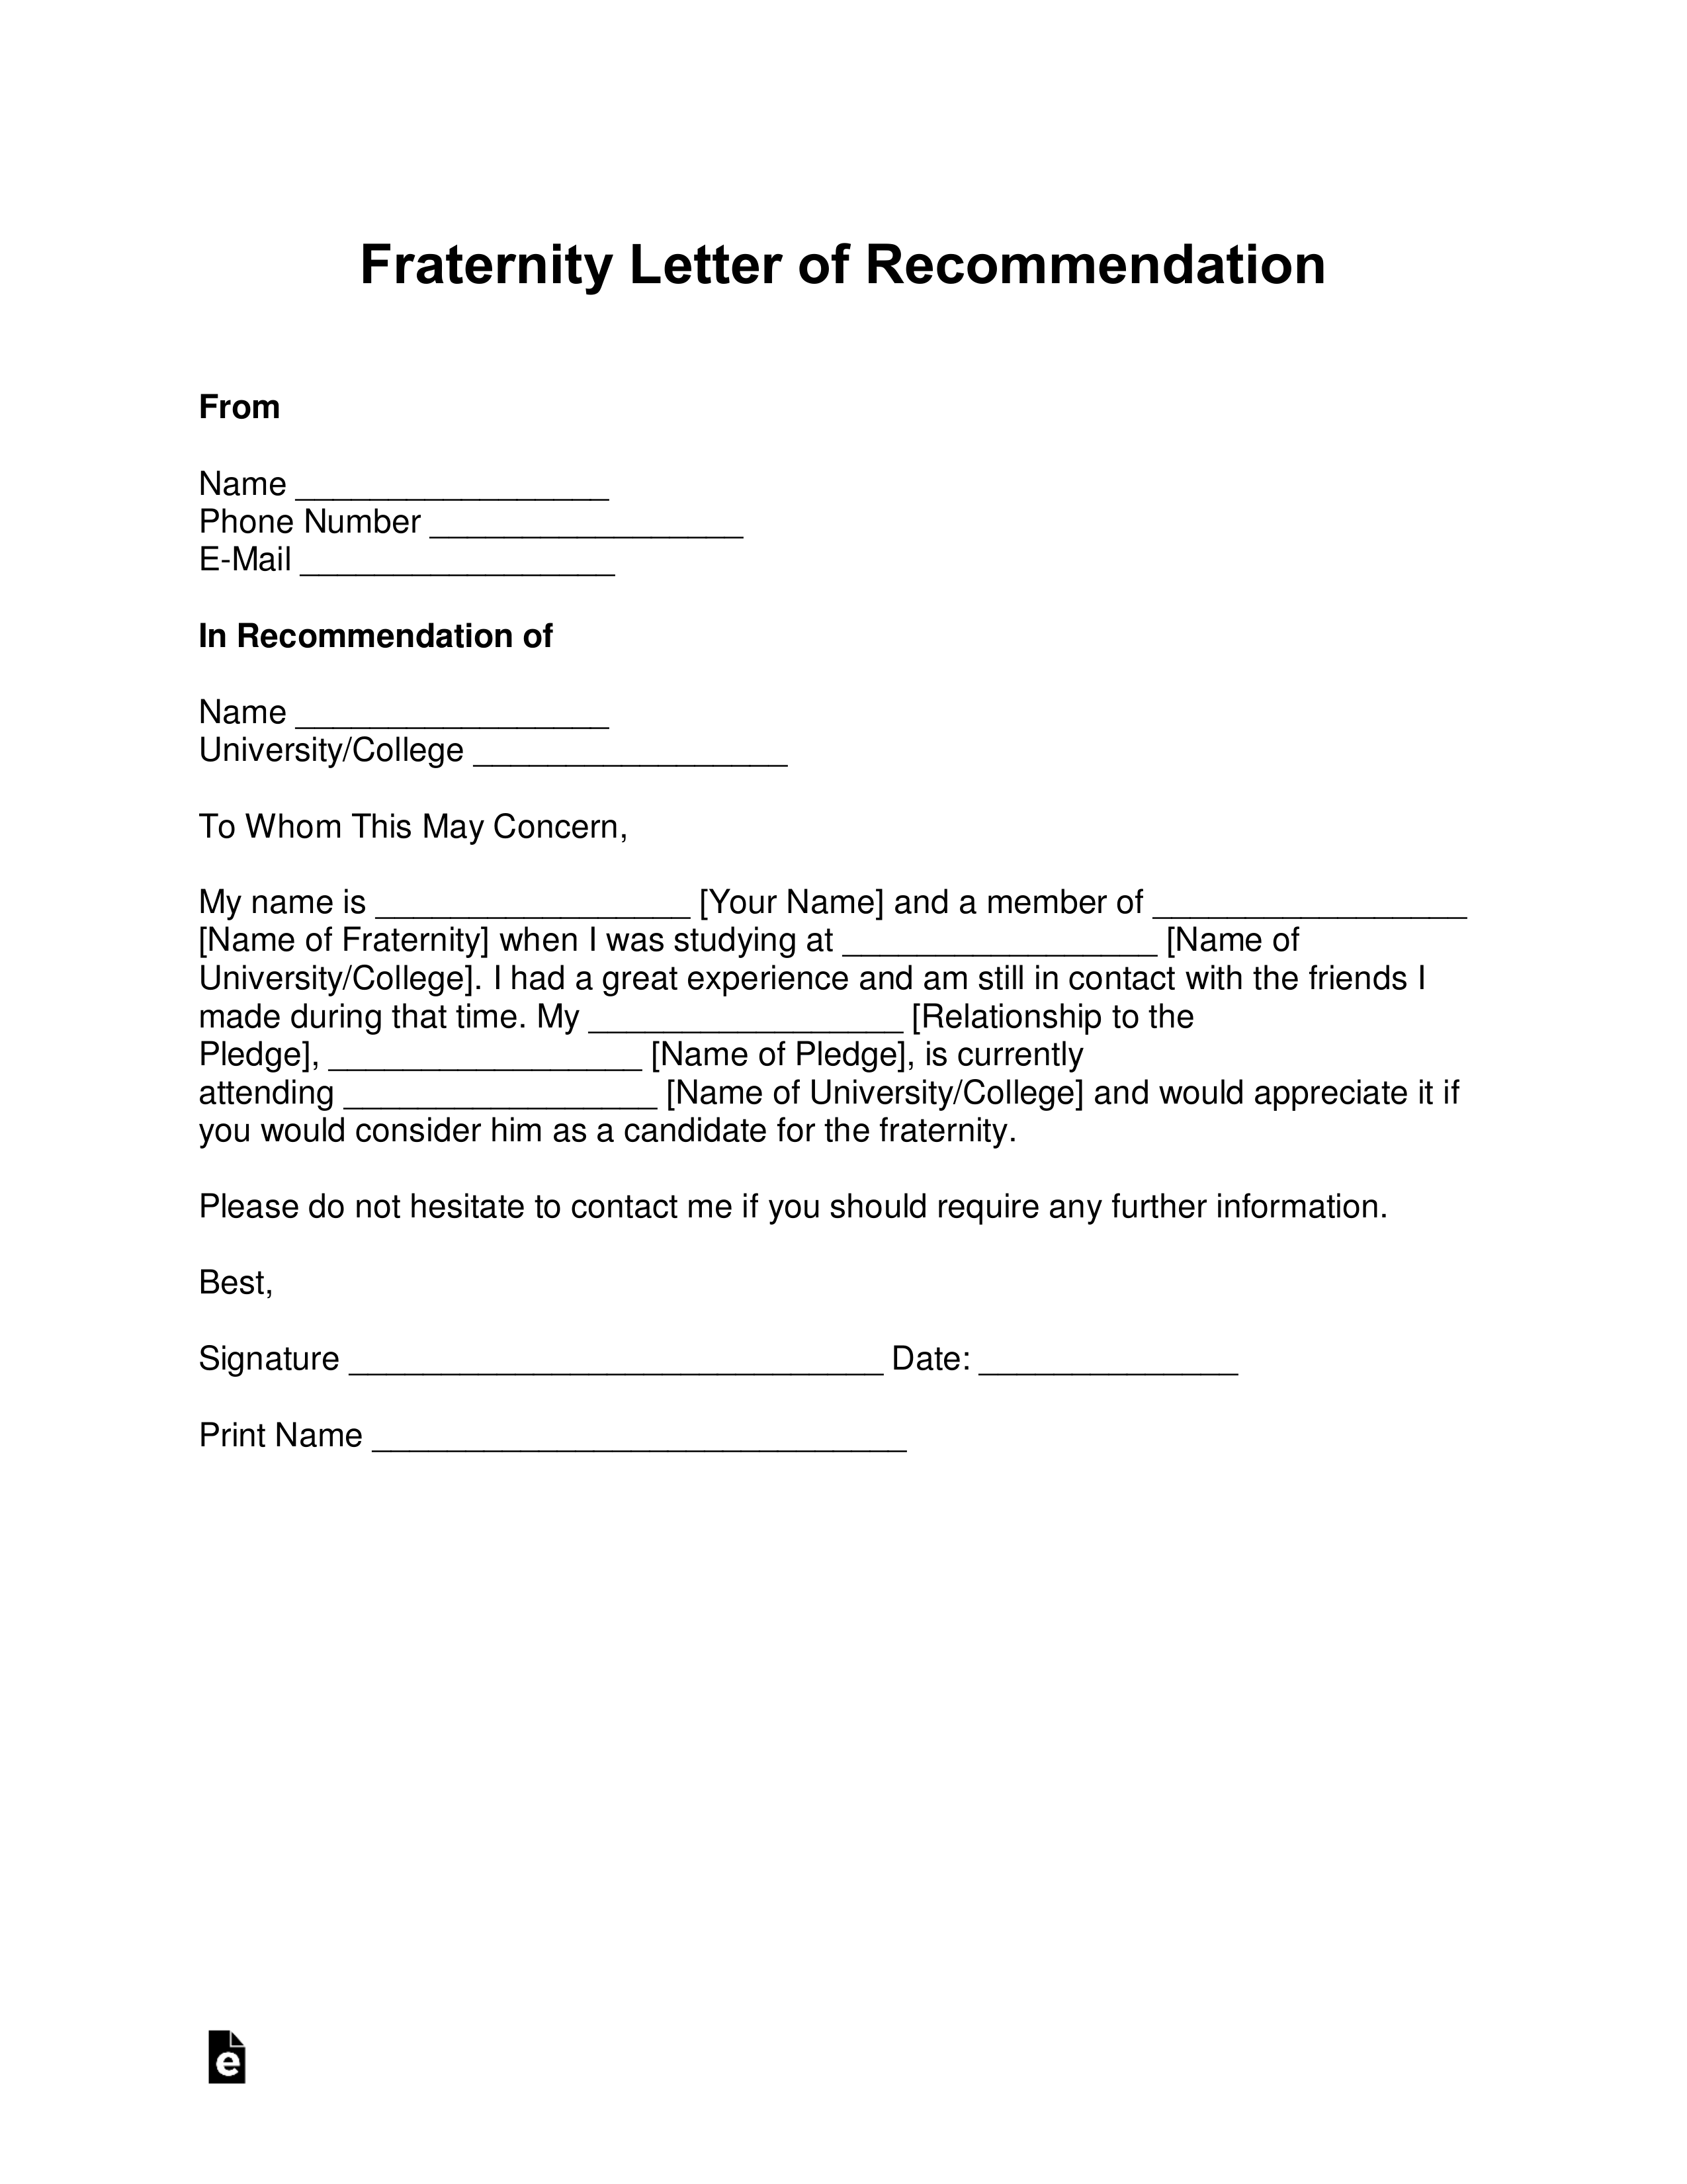 Fraternity Letter of Recommendation Template – with Samples